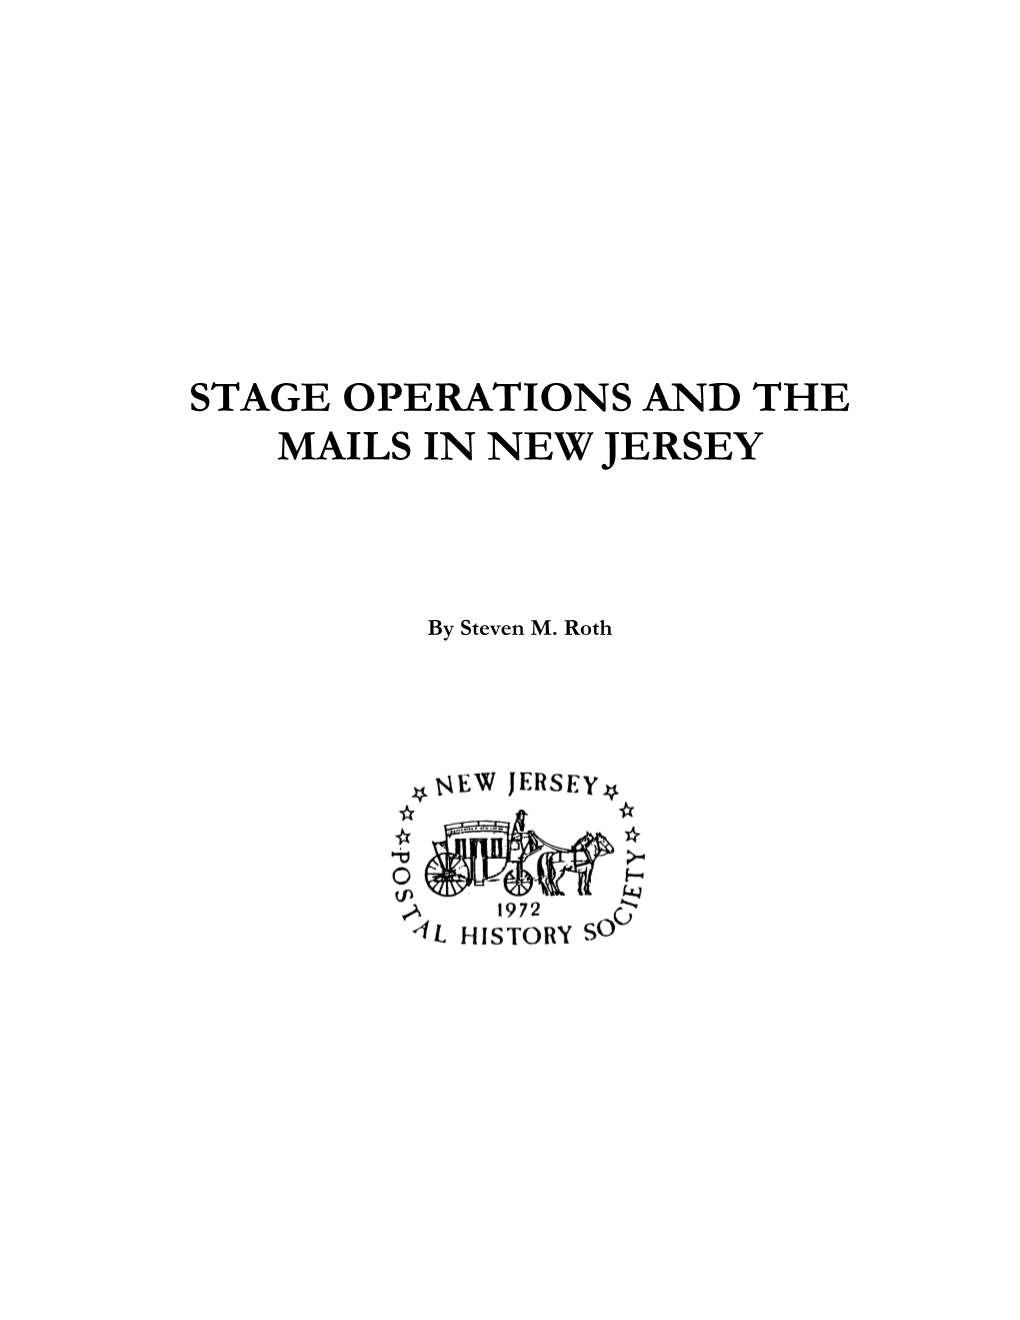 Stage Operations and the Mails in New Jersey